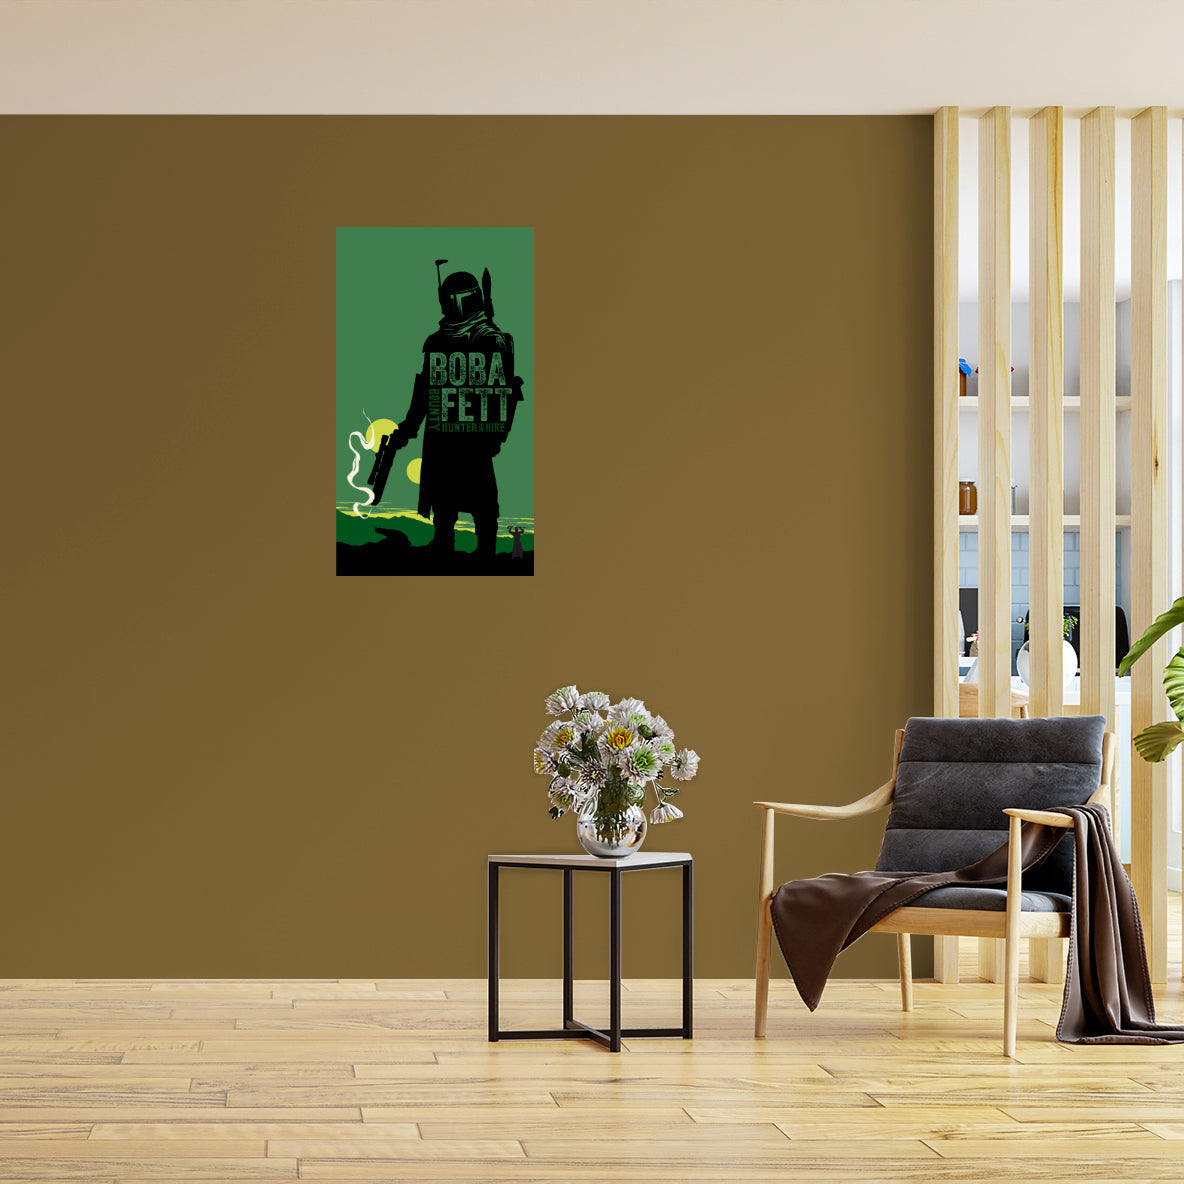 Book of Boba Fett: Boba Fett Bounty Hunter for Hire Poster - Officially Licensed Star Wars Removable Adhesive Decal